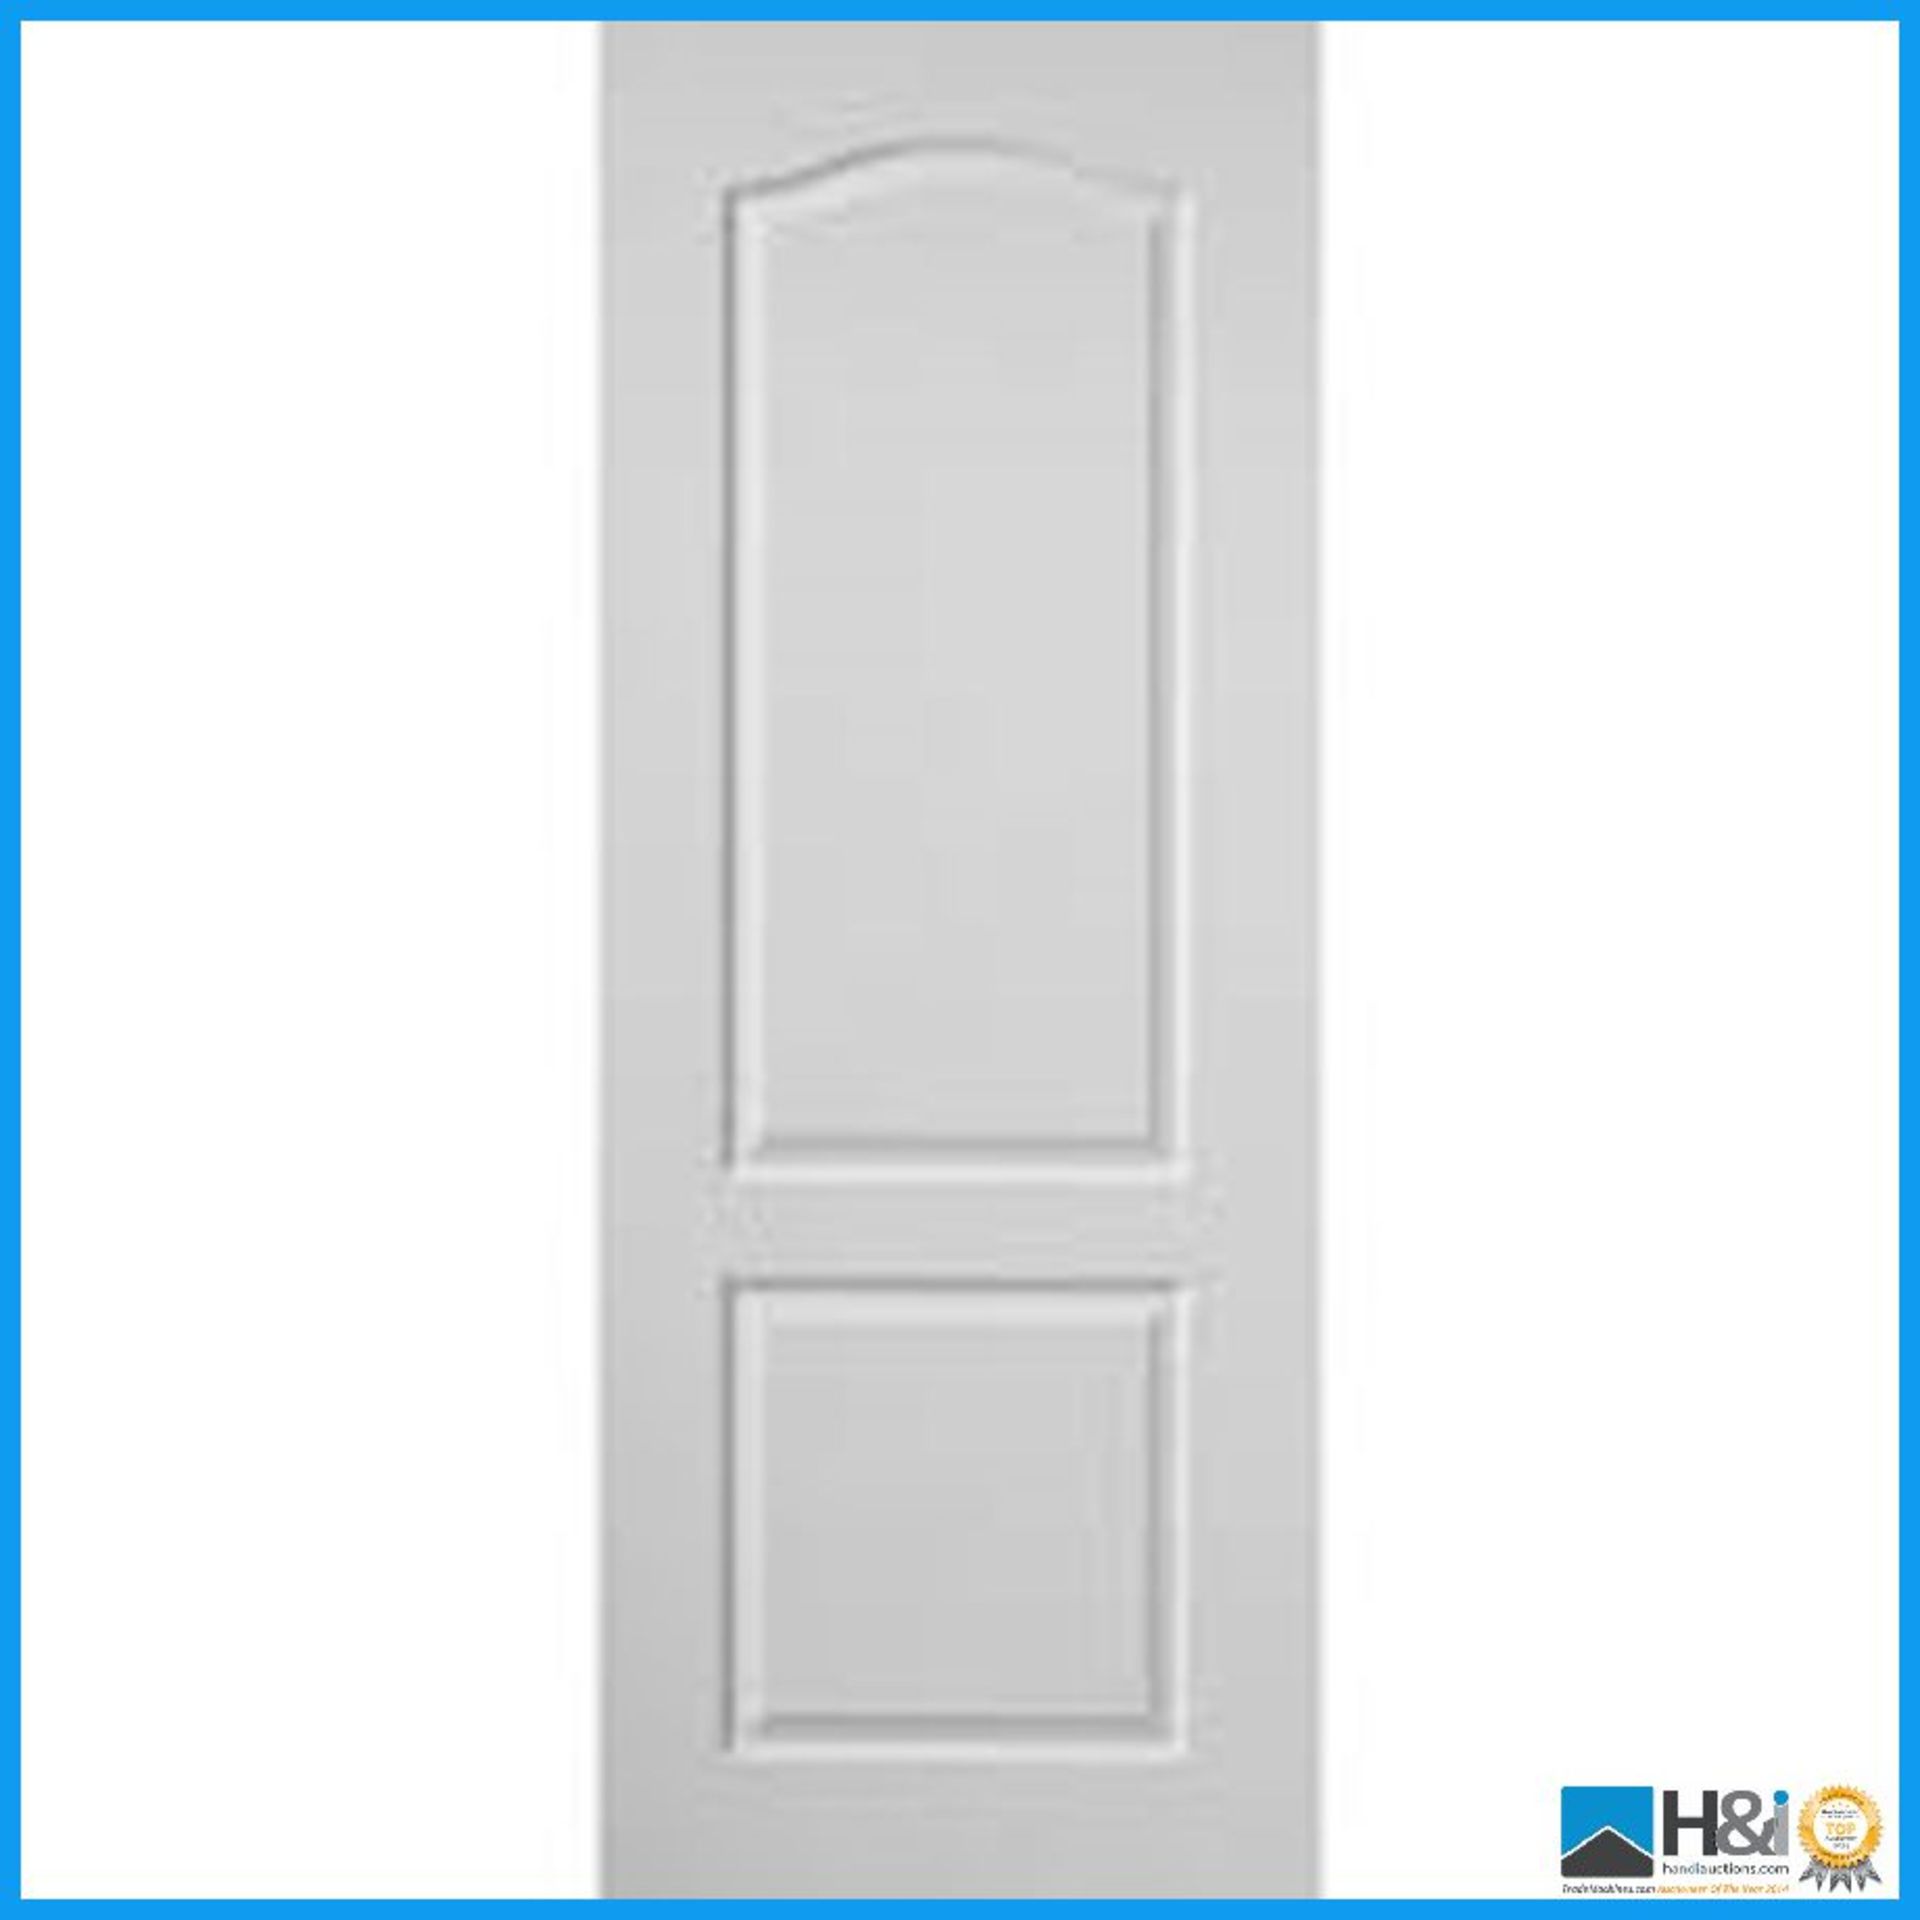 Classy interior door. Size: 2040 x 726 mm. RRP £39.99. Appraisal: Viewing Essential Serial No: N/A